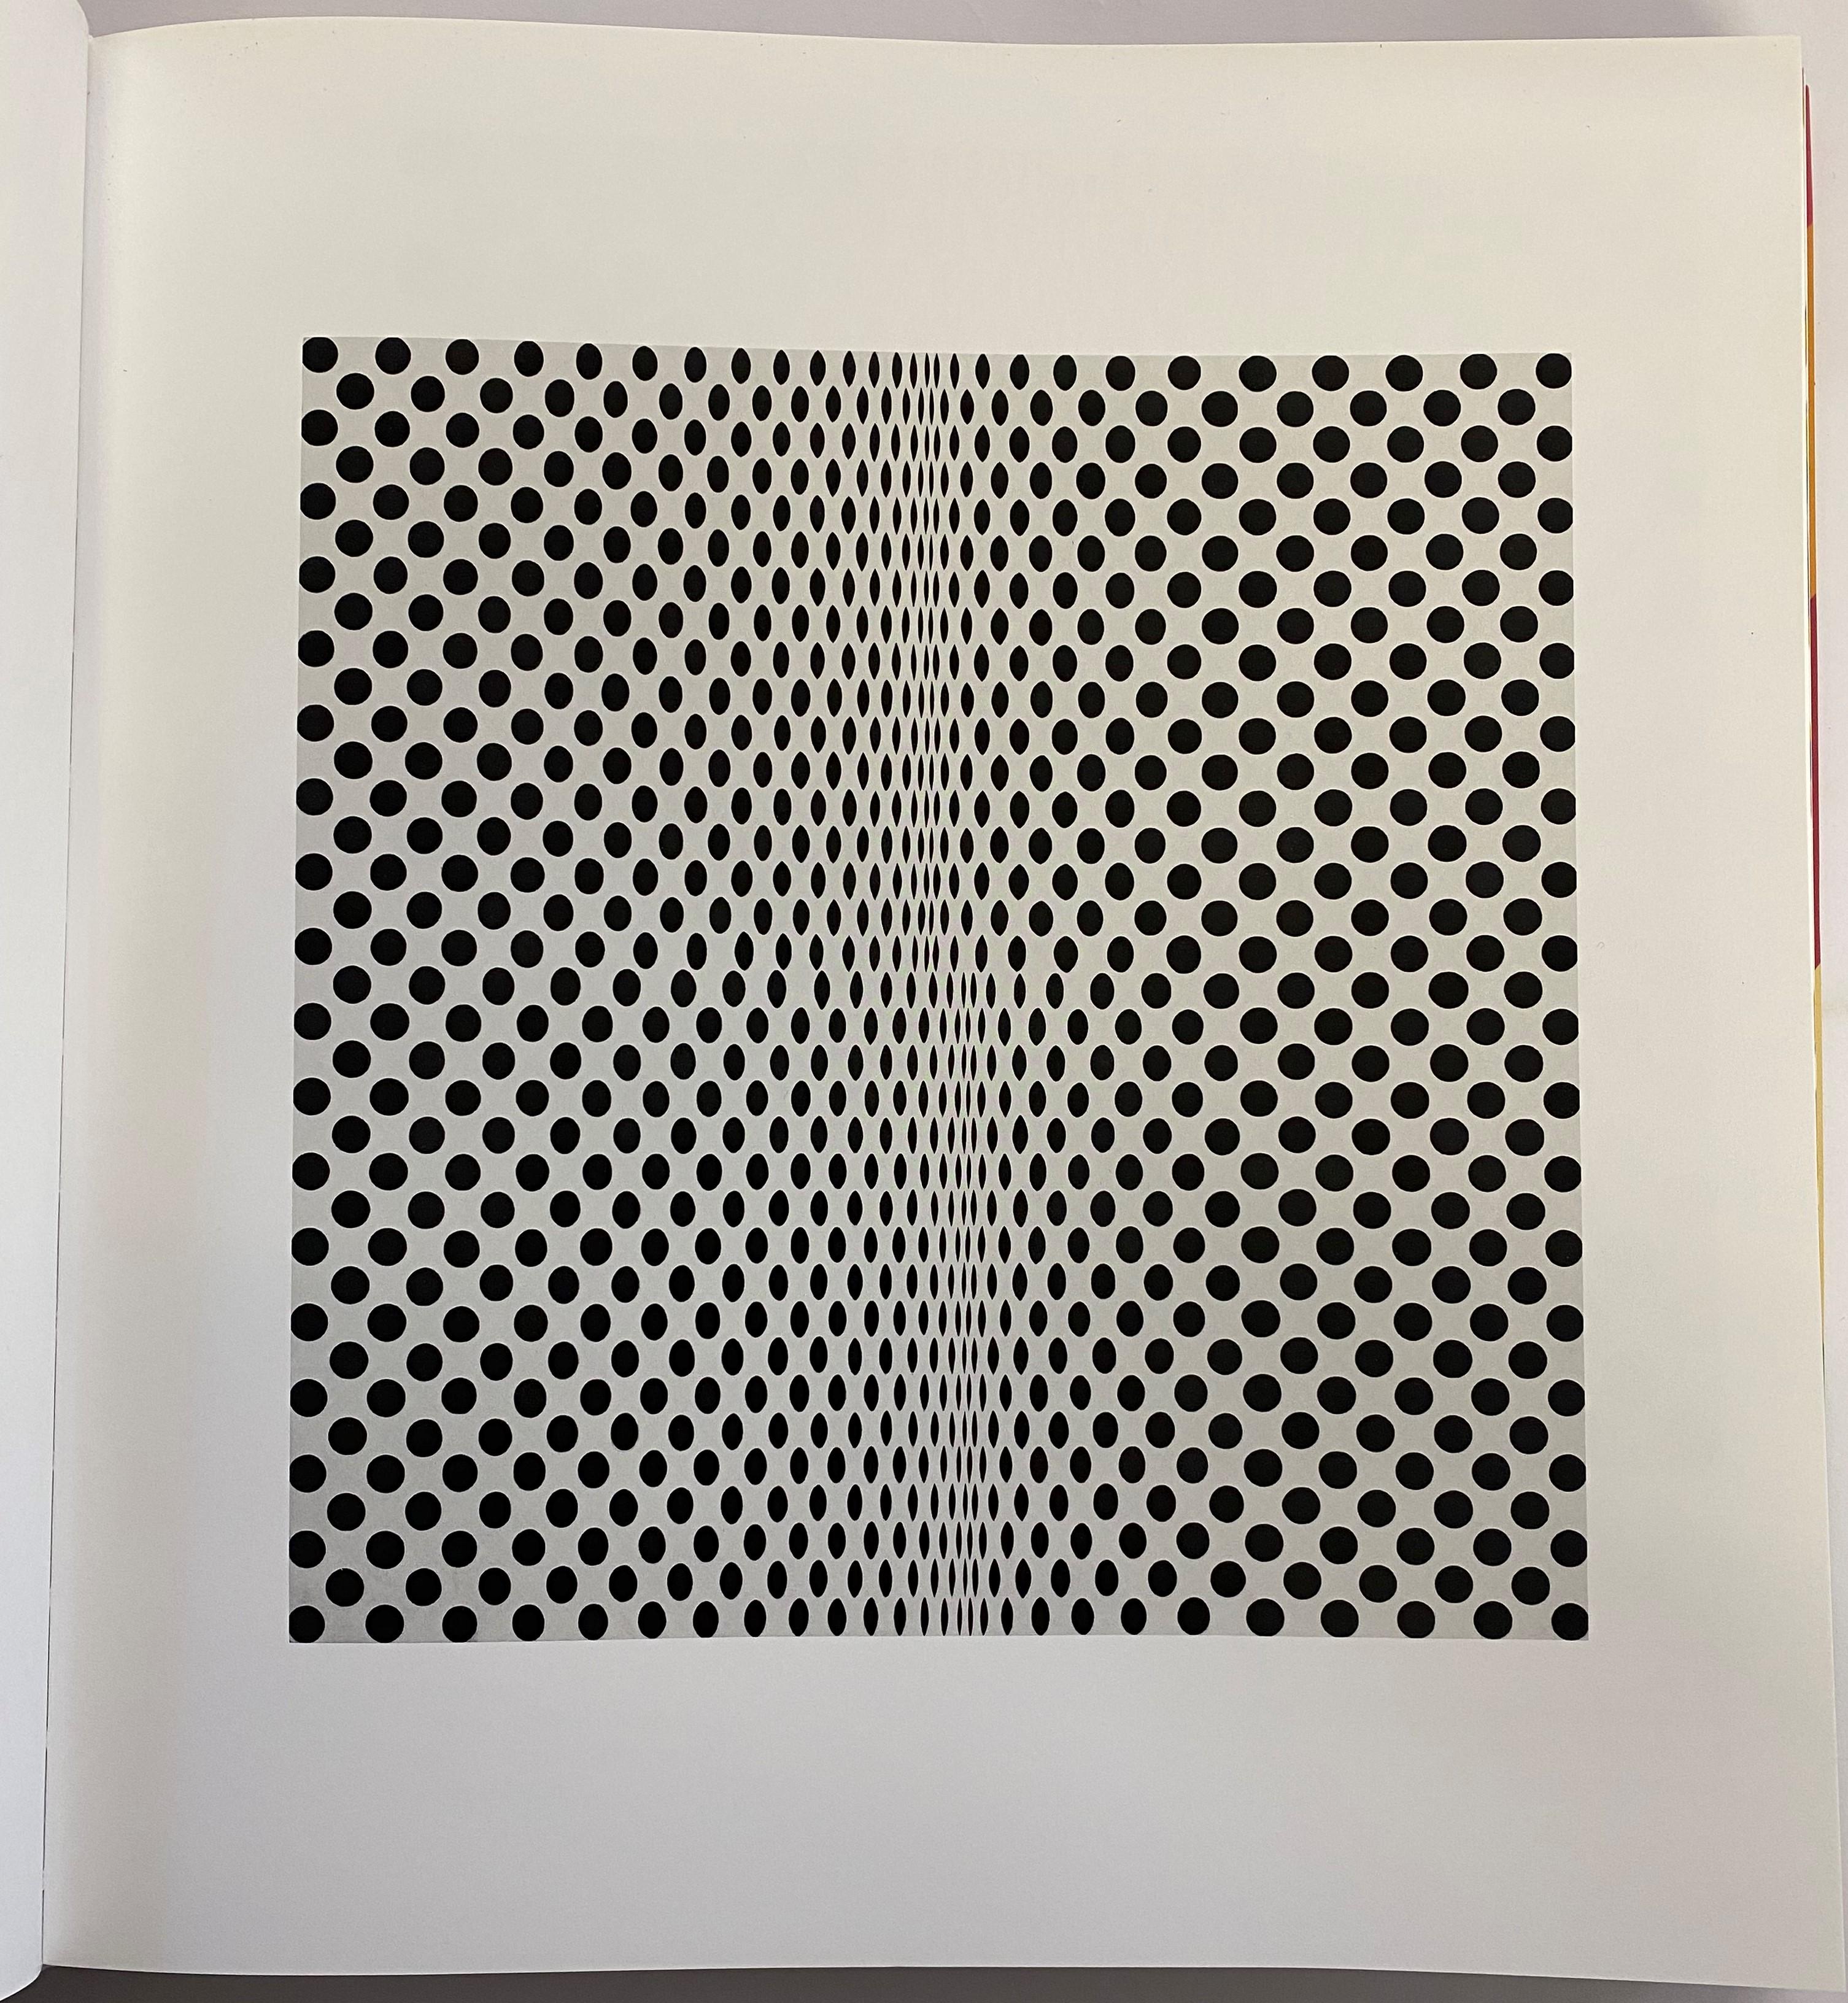 Bridget Riley by Bridget Riley, Robert Kudielka, Eric De Chassey Et All, (Book) In Good Condition For Sale In North Yorkshire, GB